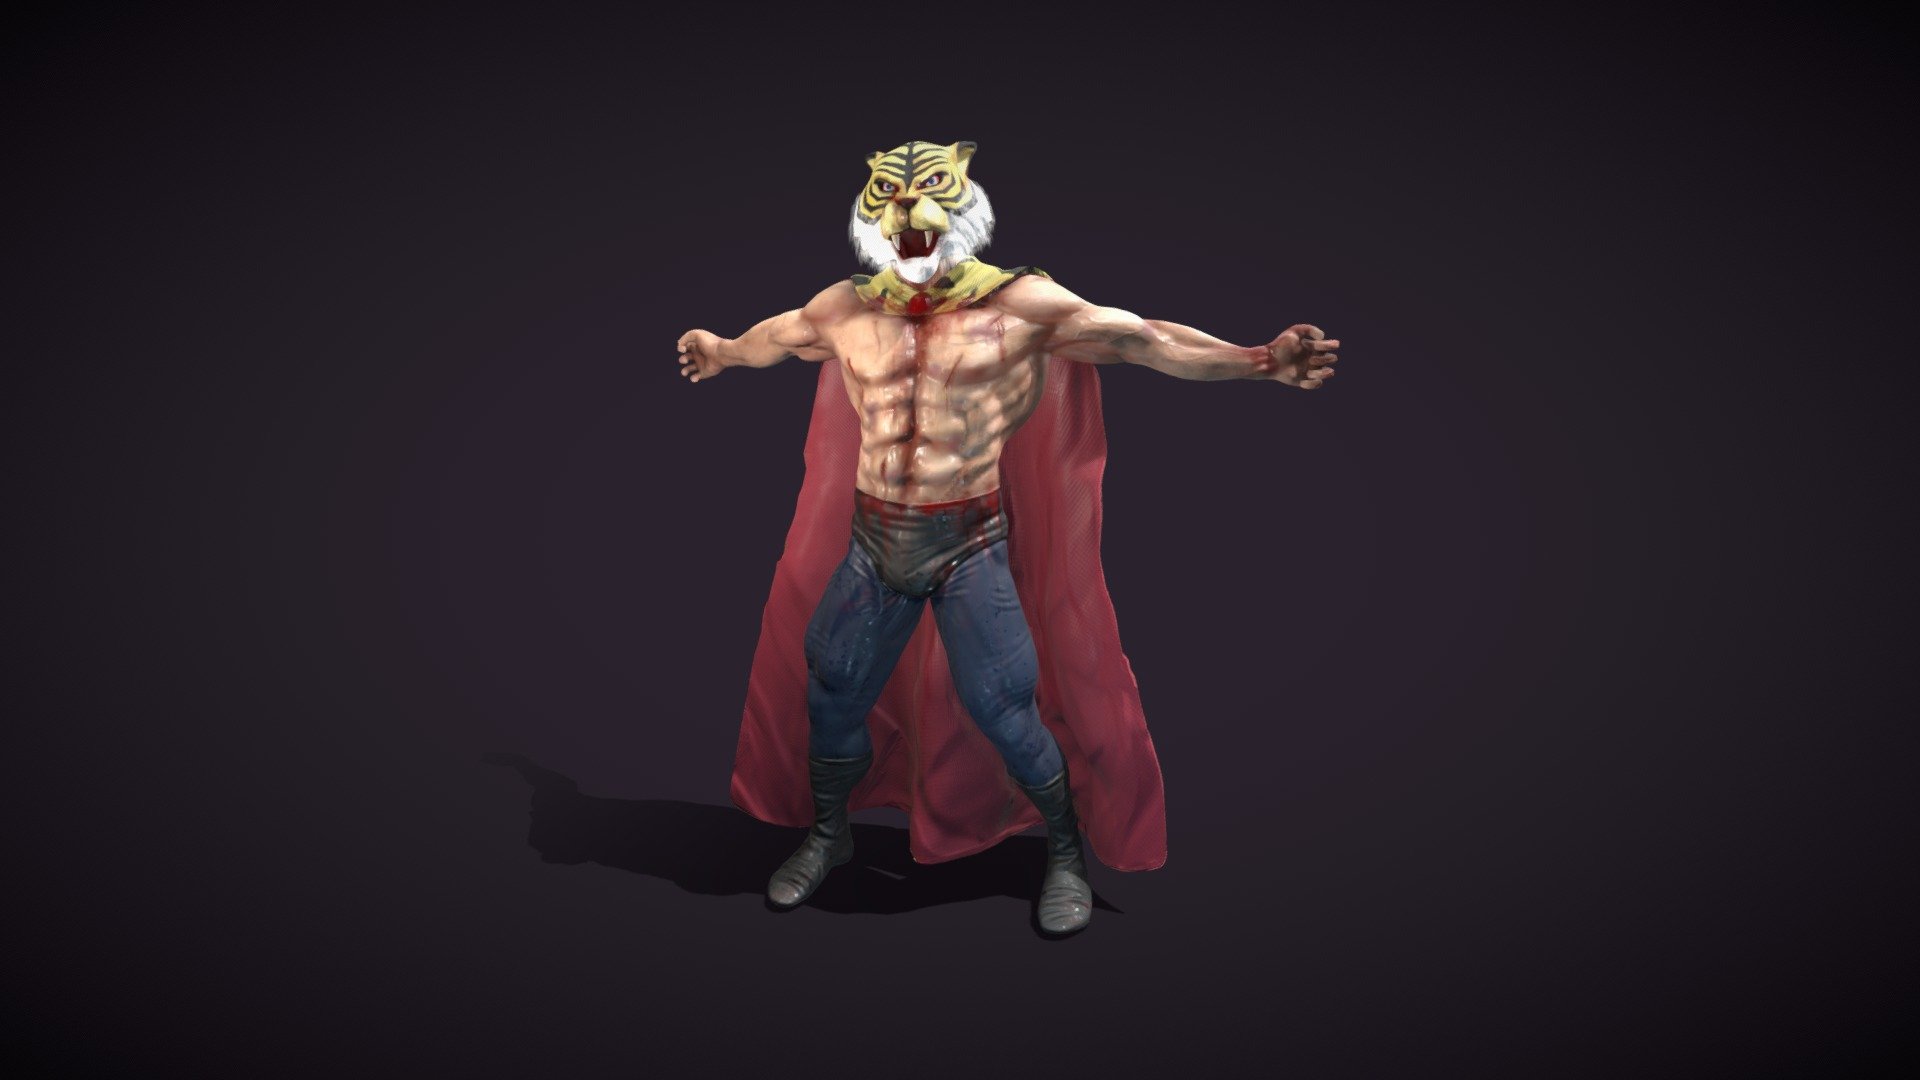 Hello guys,
this is my game ready version of Tiger Man (タイガー・マスク).
It's my August character, I am on the challenge to myself: a game ready character per month.
I hope you can like it!

I made the high poly with Zbrush and the low poly/retopology with Maya. The mantle low poly in Marvelous Designer.
After this, I baked the maps with Marmoset Toolbag 3 and texturized with Substance Painter. Rigged and animated on Mixamo. Weight balance made by myself in Maya 3d model